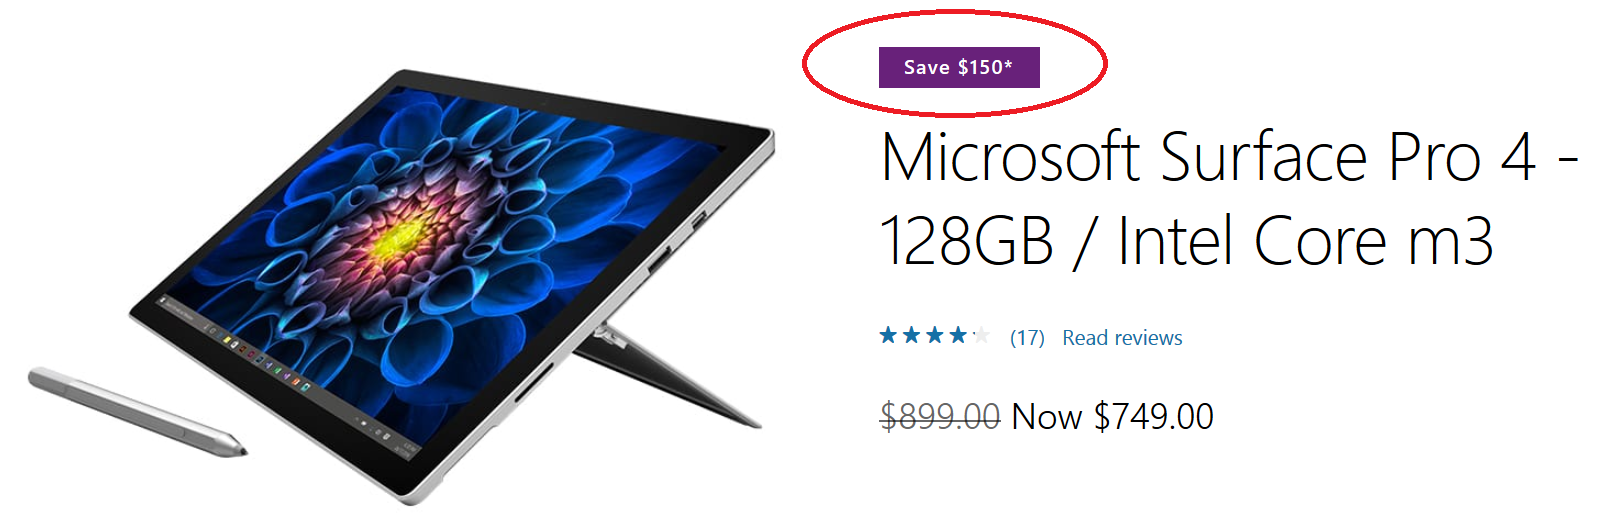 Save 16.7% on the 128GB Surface Pro 4 from Microsoft - DEAL: Buy the 128GB Microsoft Surface Pro 4 with Intel Core m3 for $749